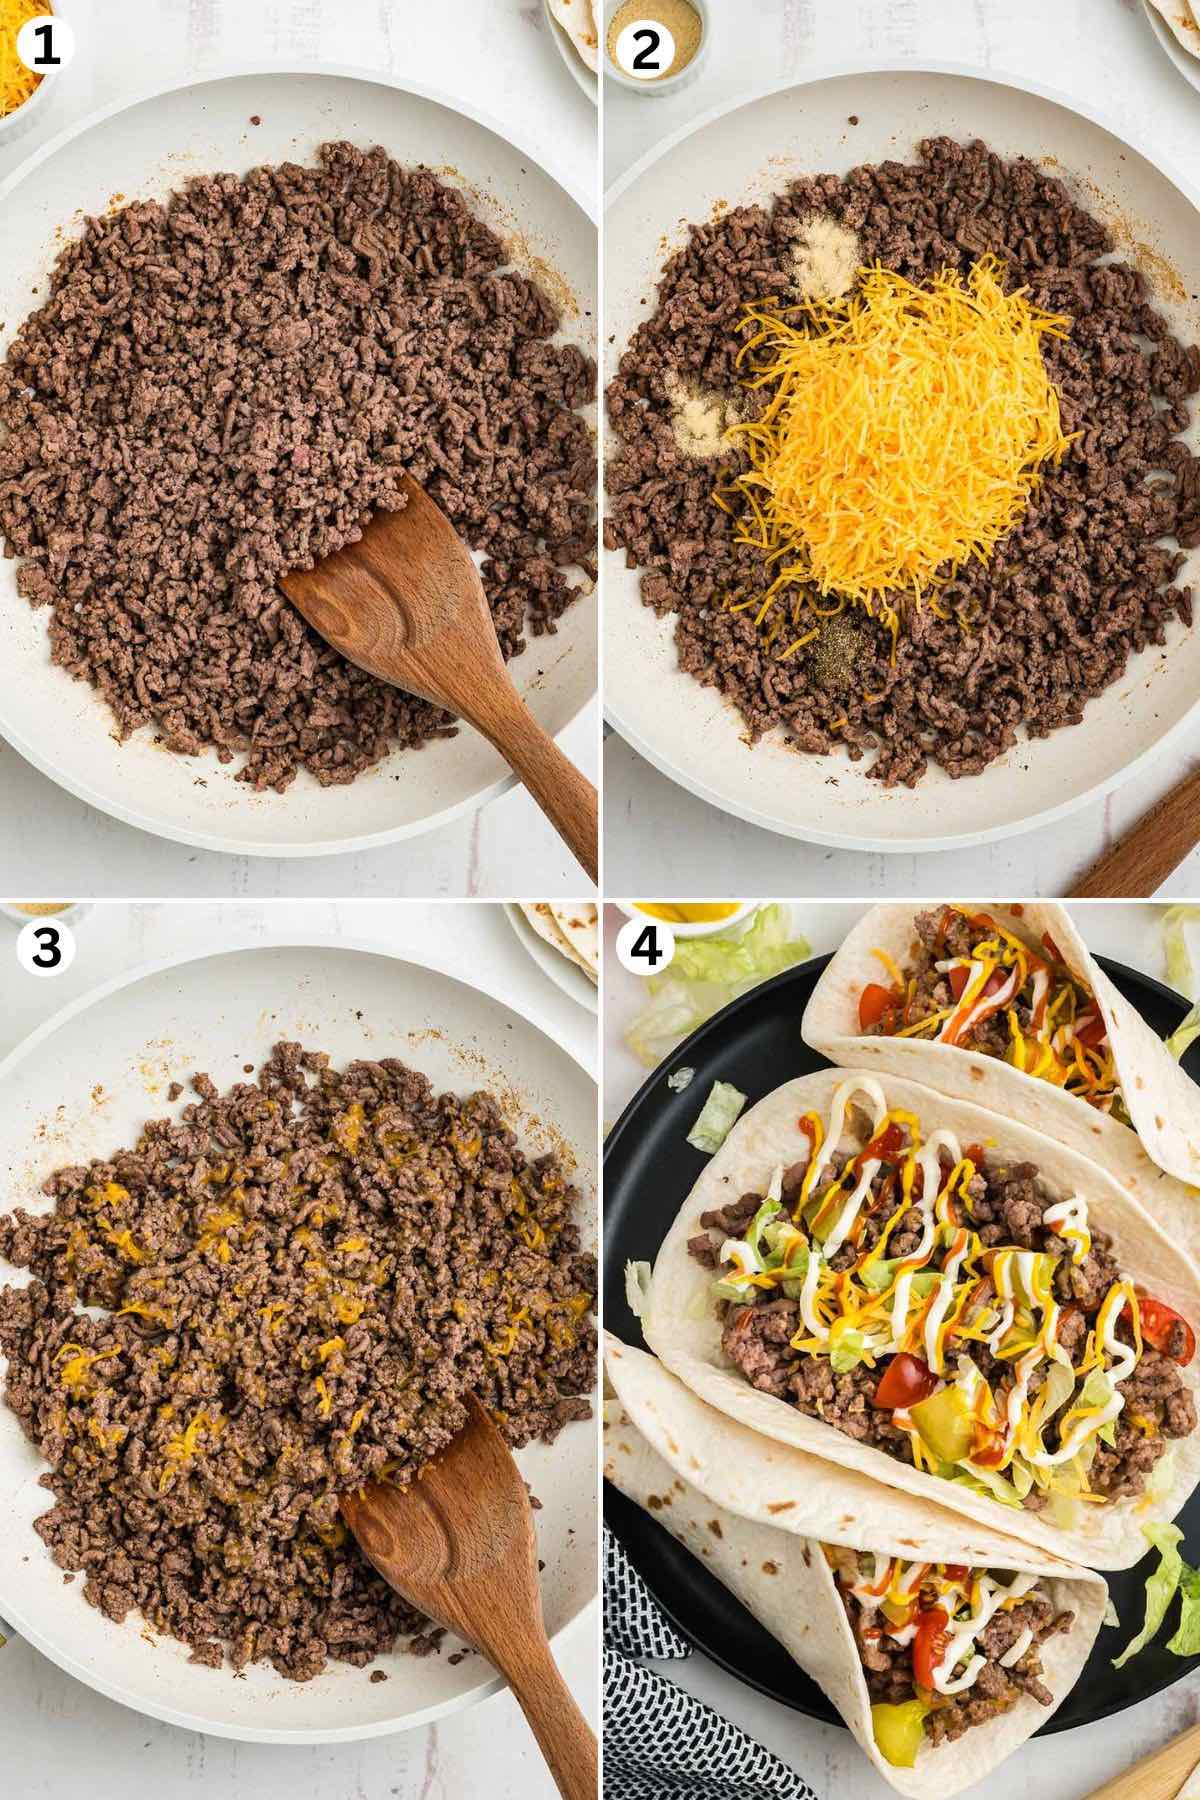 Cook the ground beef. Mix in the cheese. Stir until the cheese is fully melted. Distribute the beef mixture into the flour tortillas and garnish.